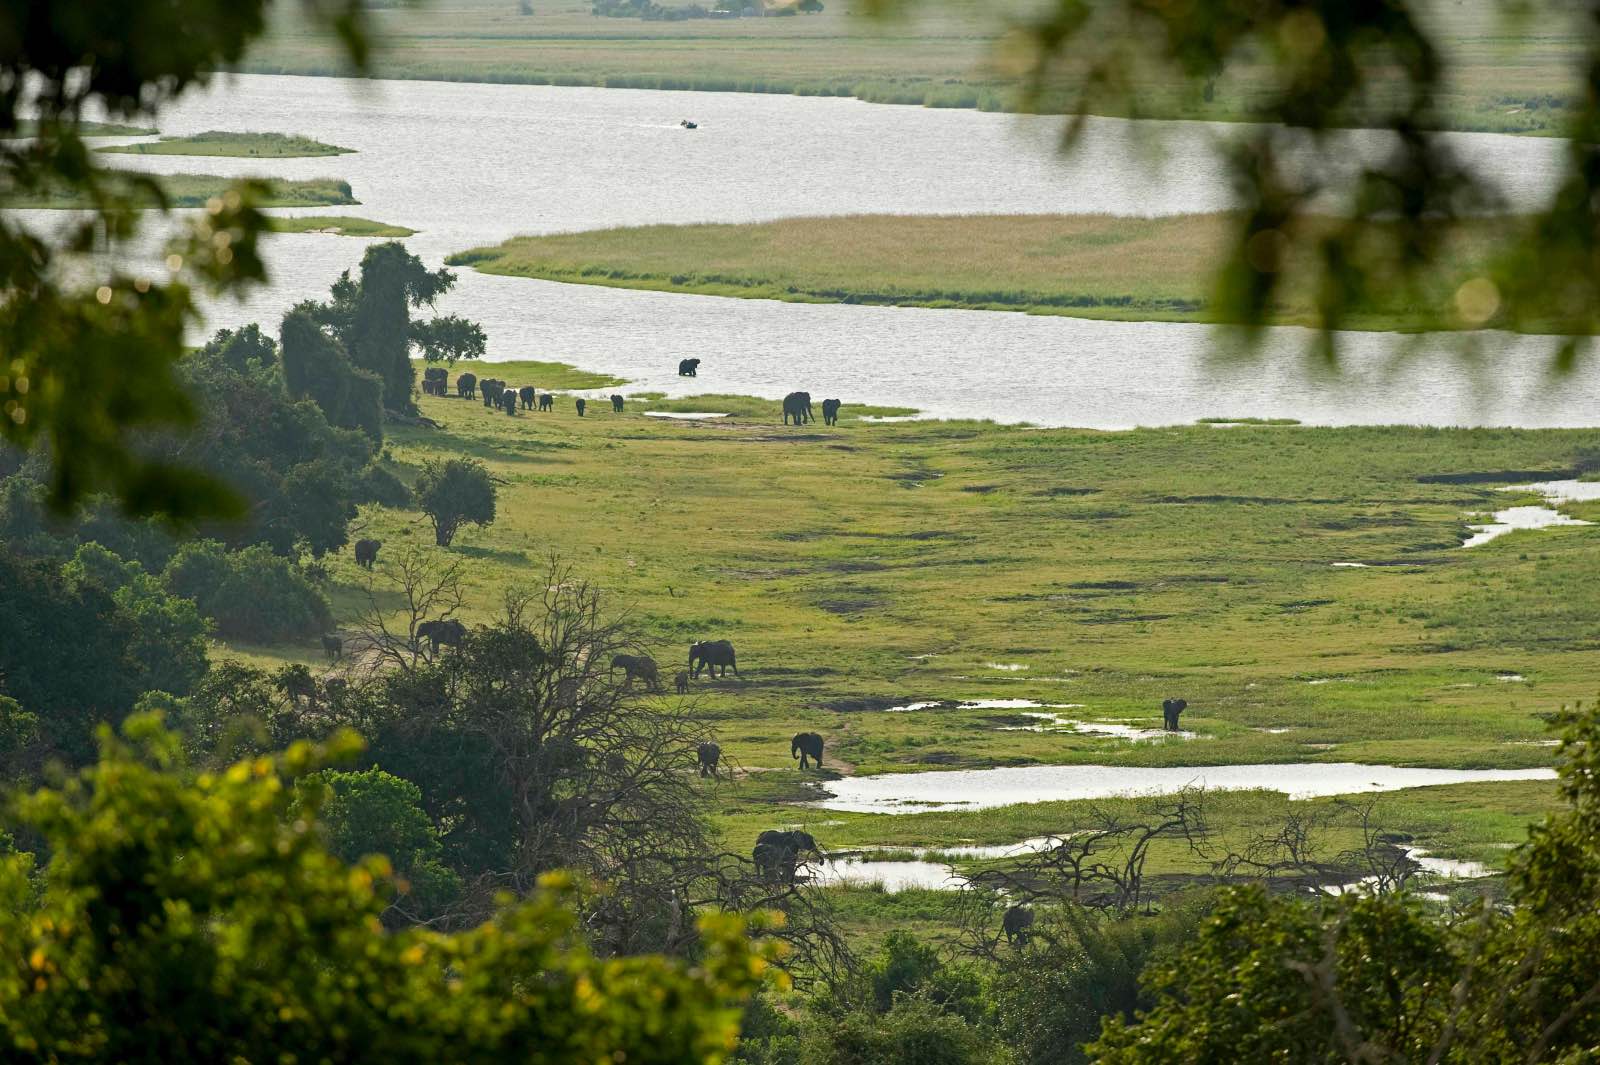 View through the trees from Chobe Chilwero down to the river and wildlife below